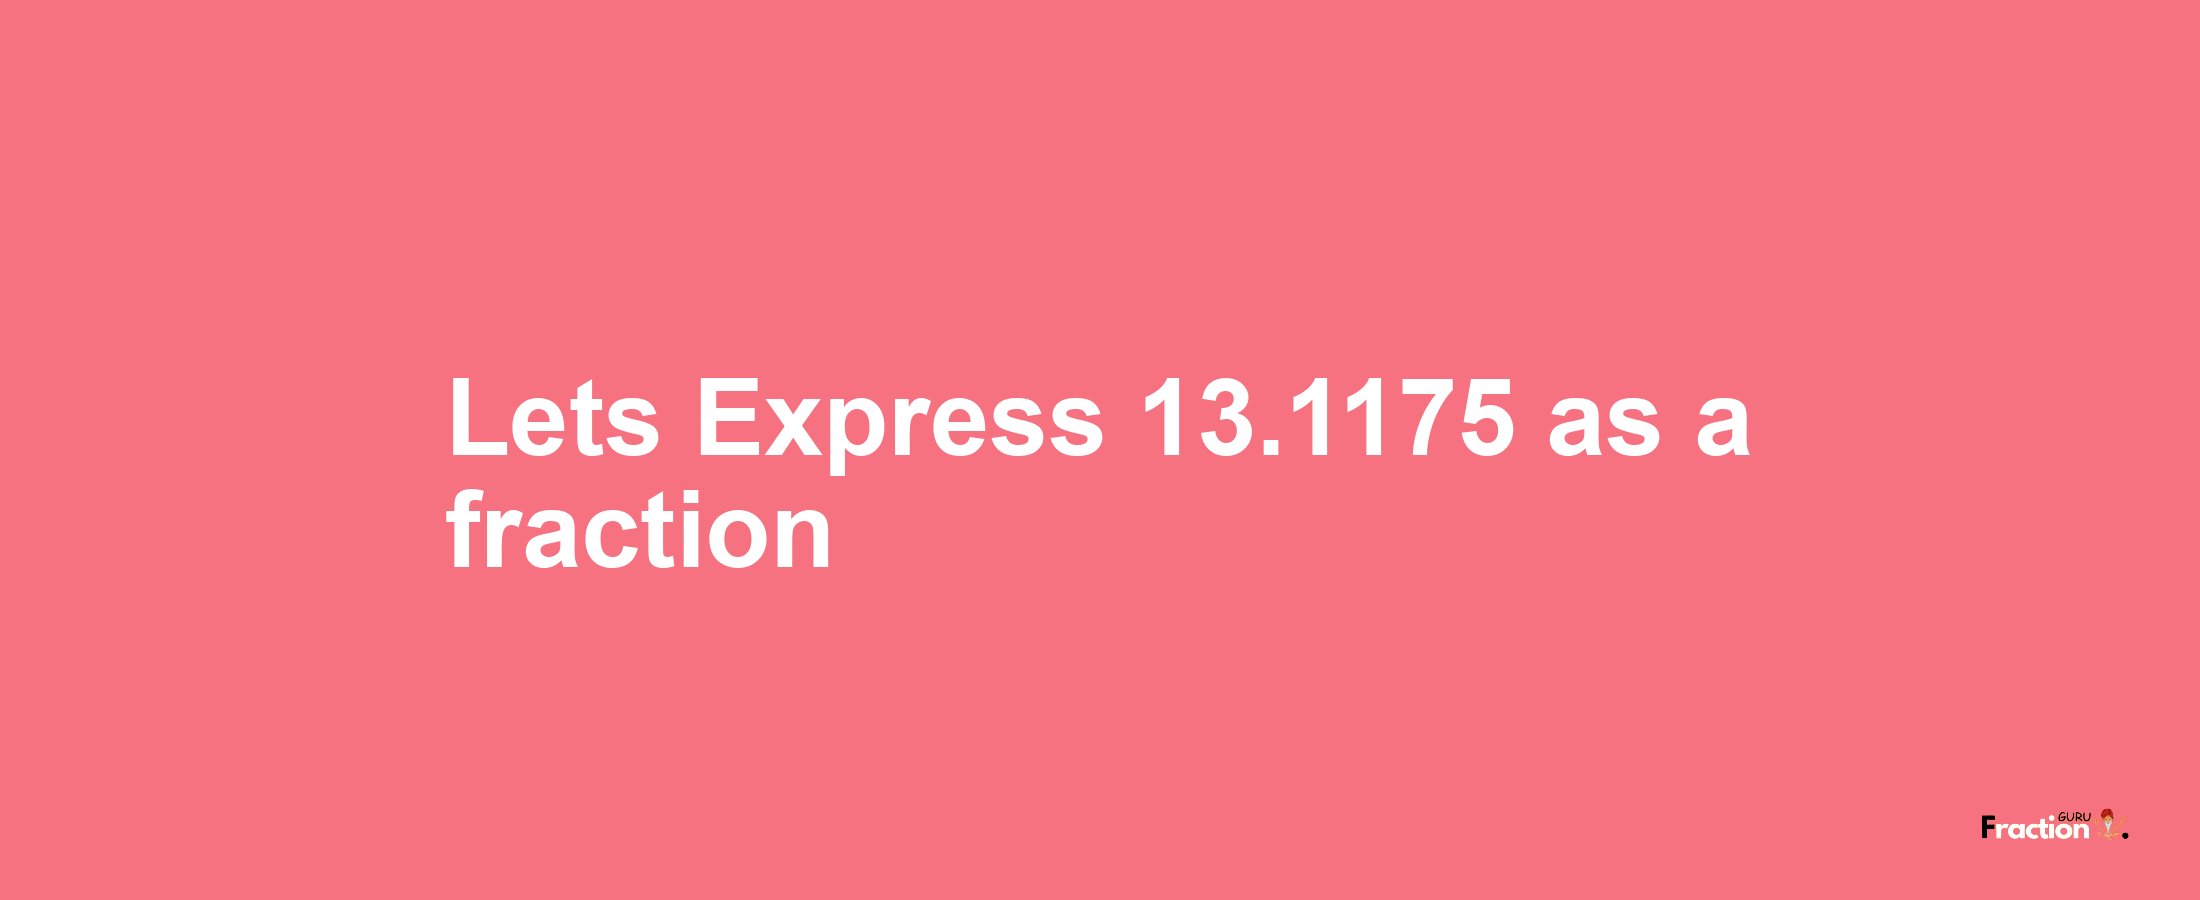 Lets Express 13.1175 as afraction